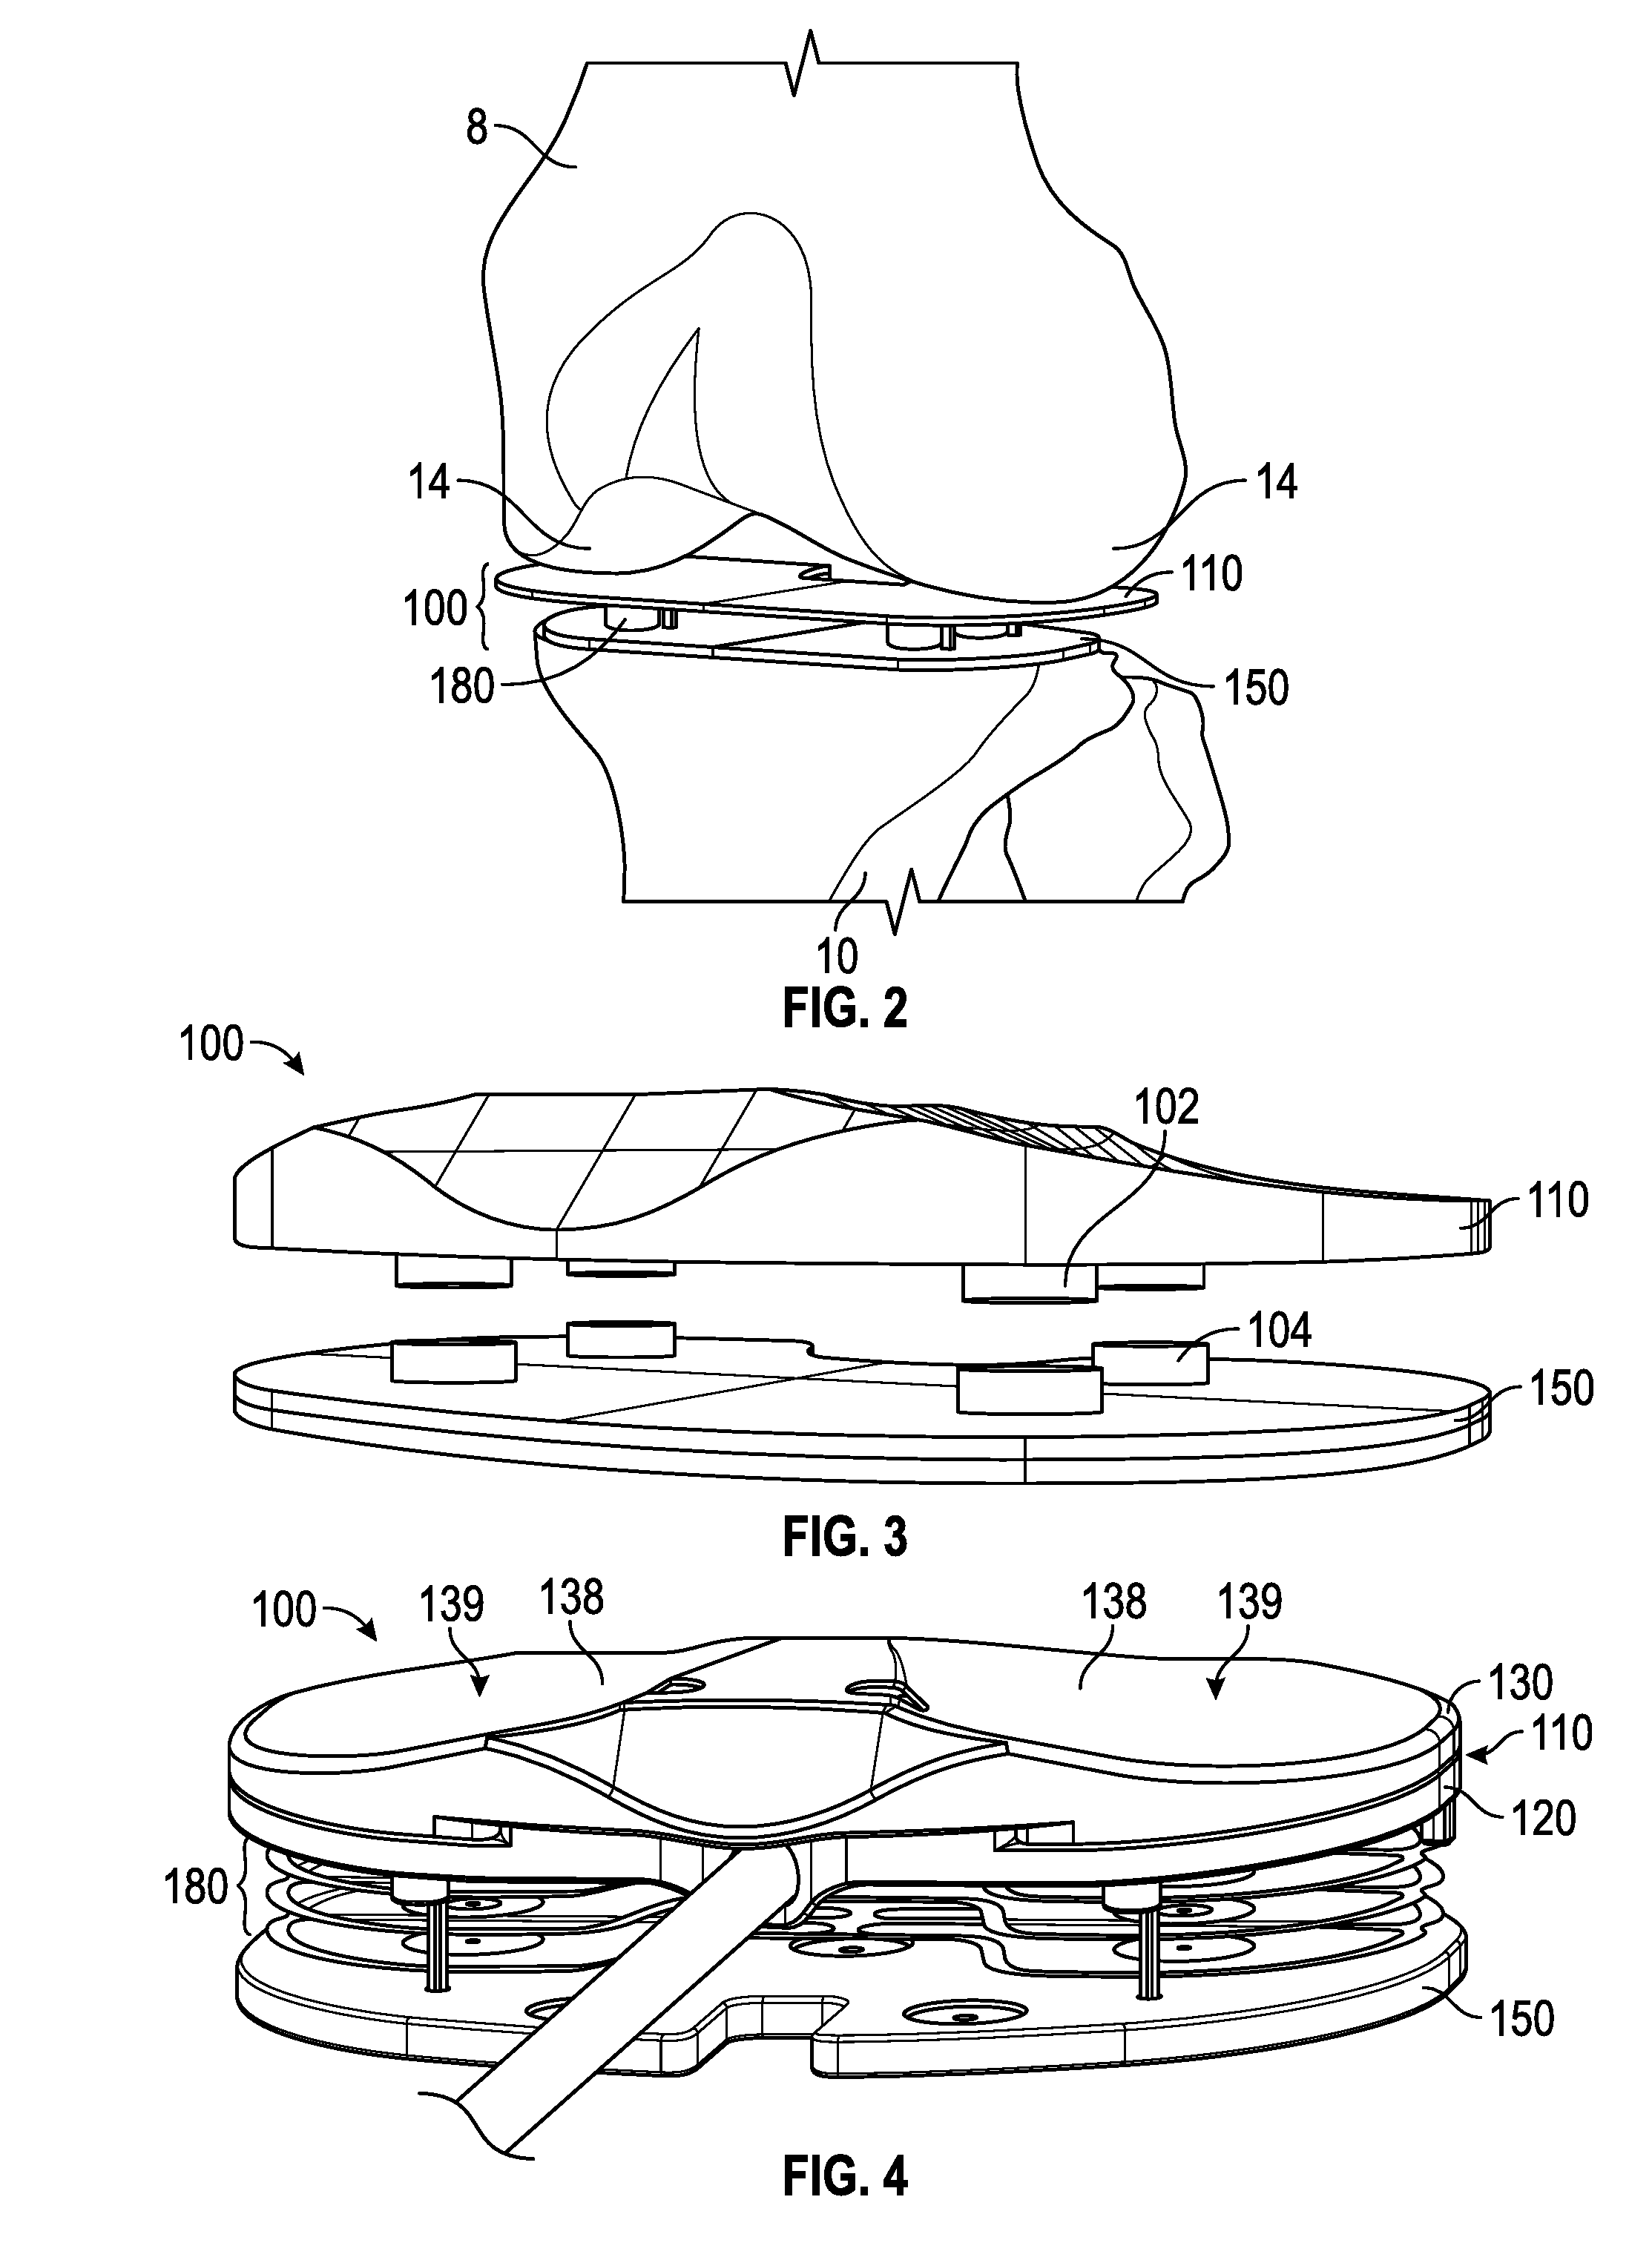 Balancing device for arthroplasty and methods for use